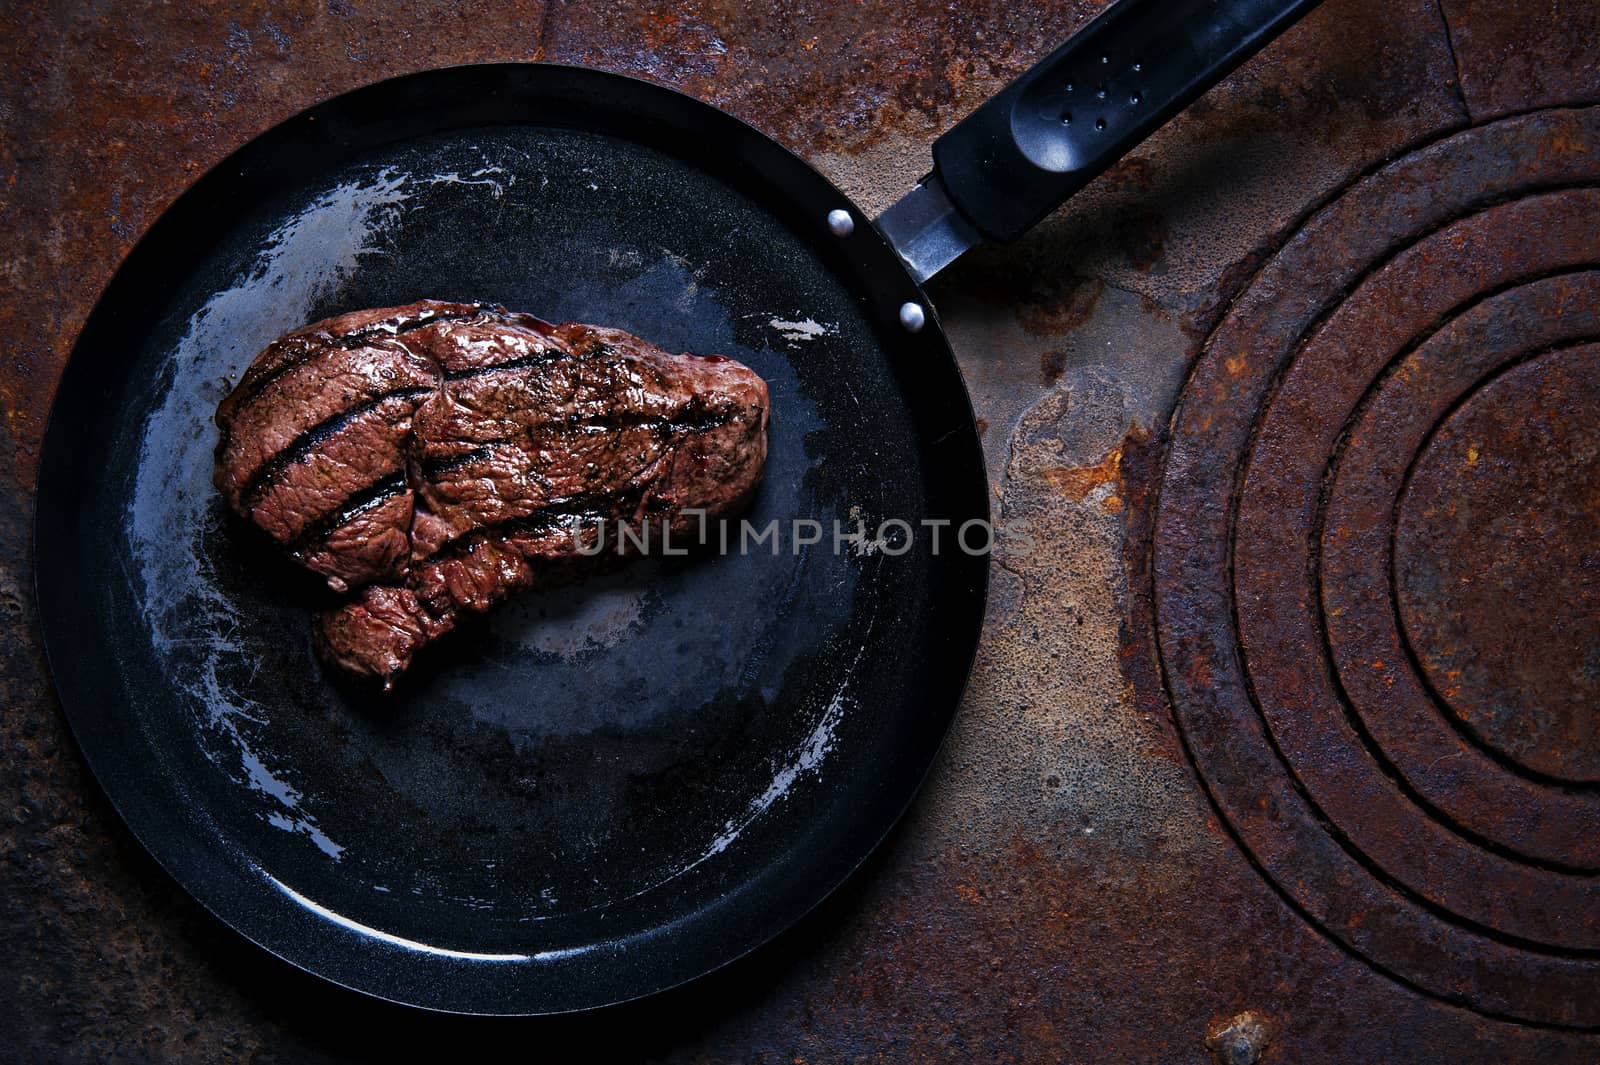 Beef steak in a frying pan standing on the rusty burner by Michalowski